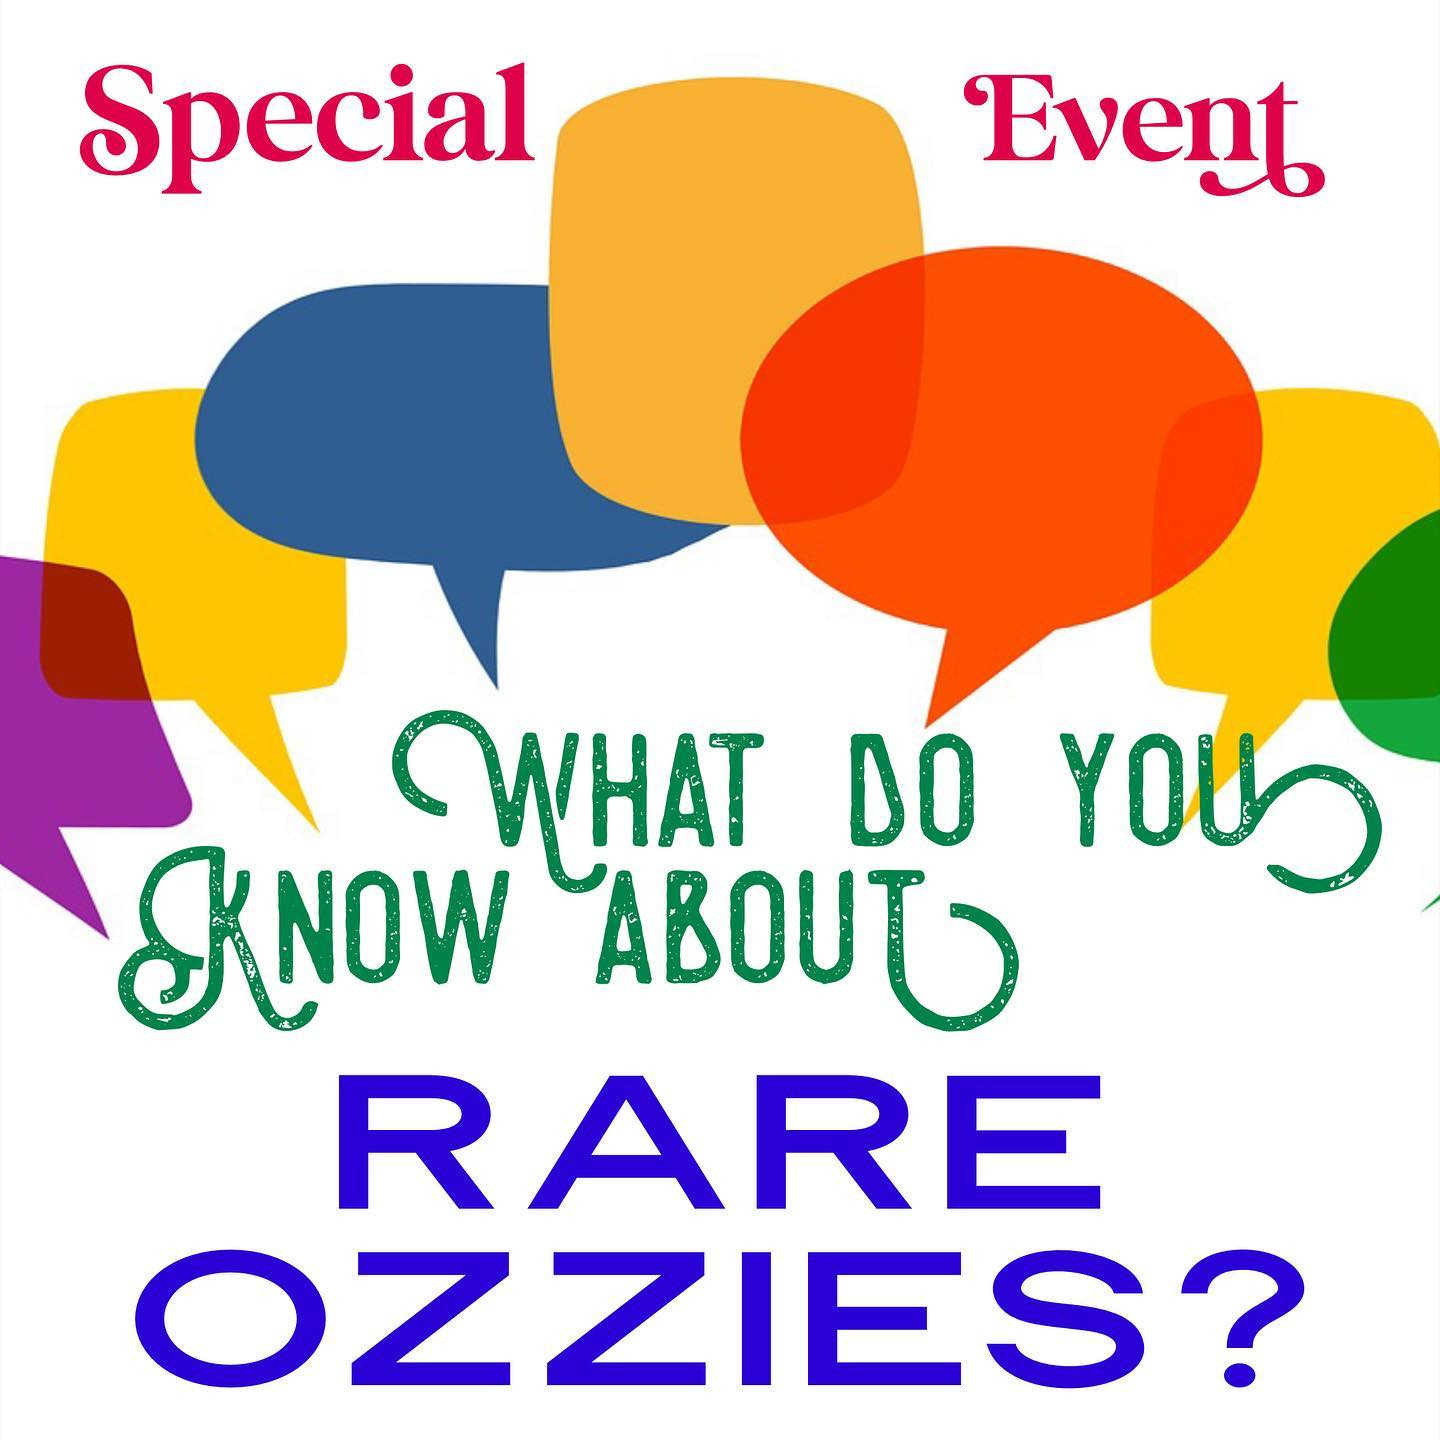 May be an image of text that says 'Special Event WHAT DO YOU KNOW ABOUT RARE OZZIES?'